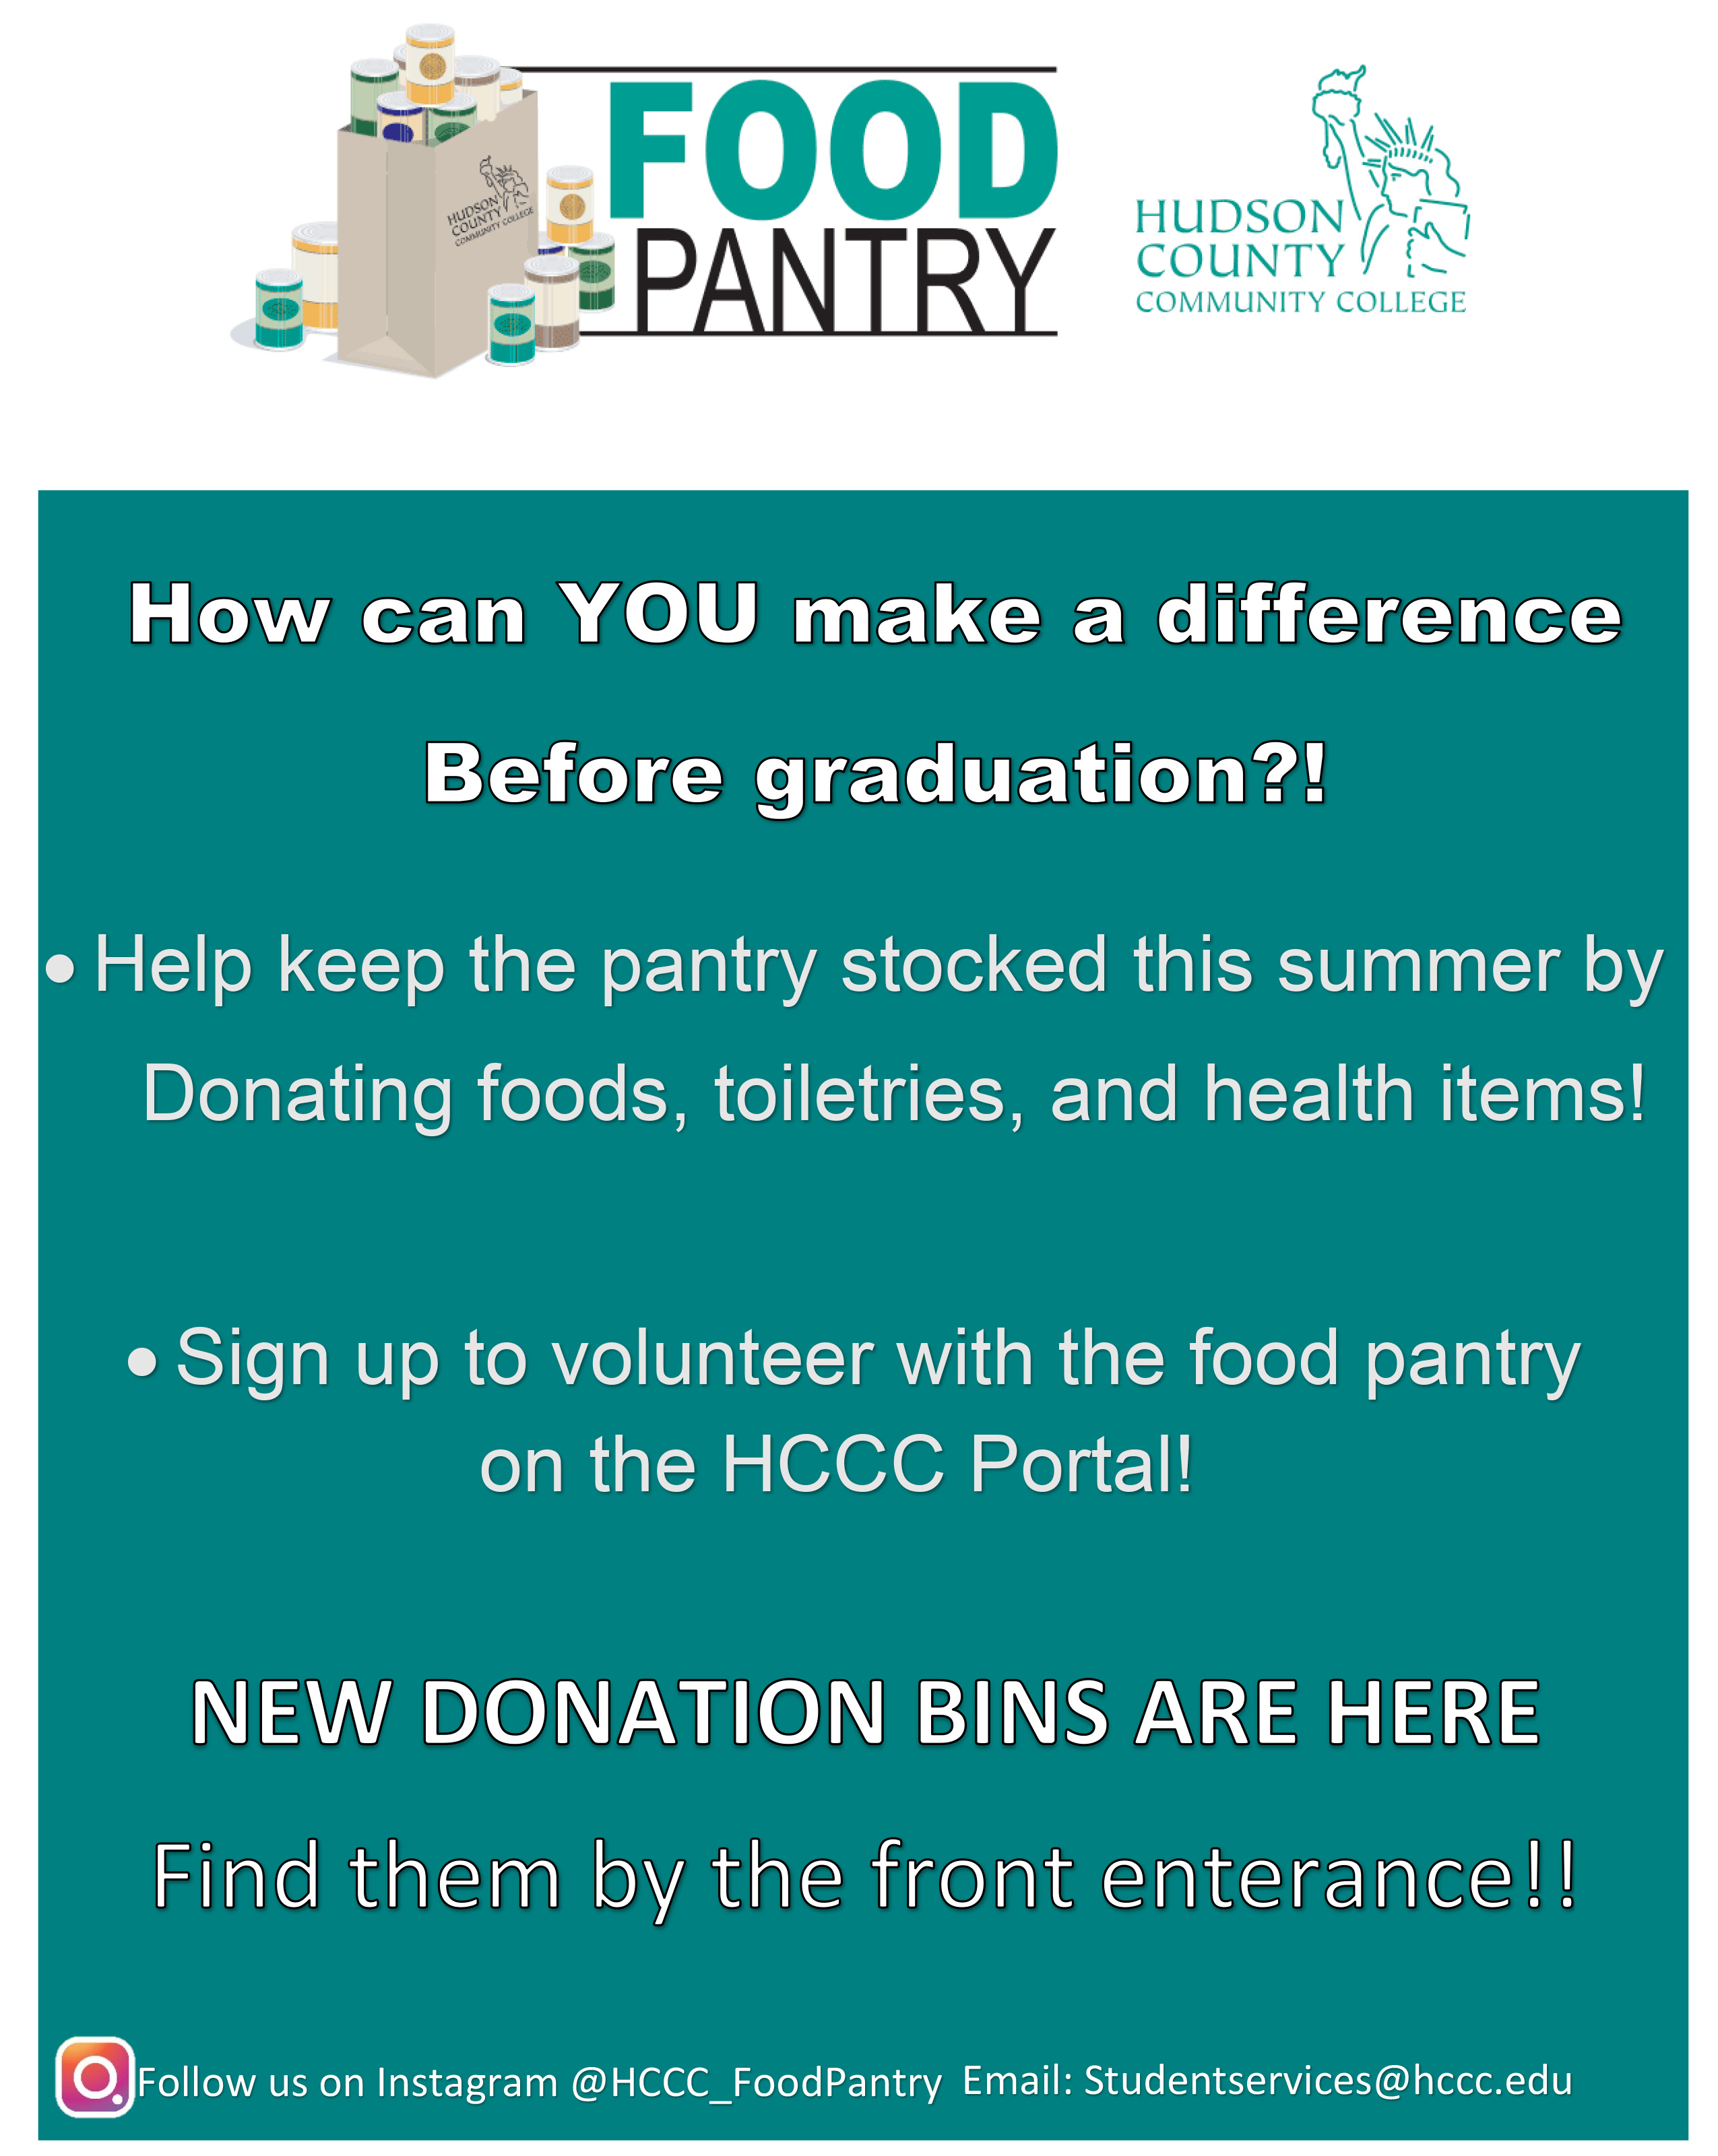 The Food Pantry Make a Difference Flyer.